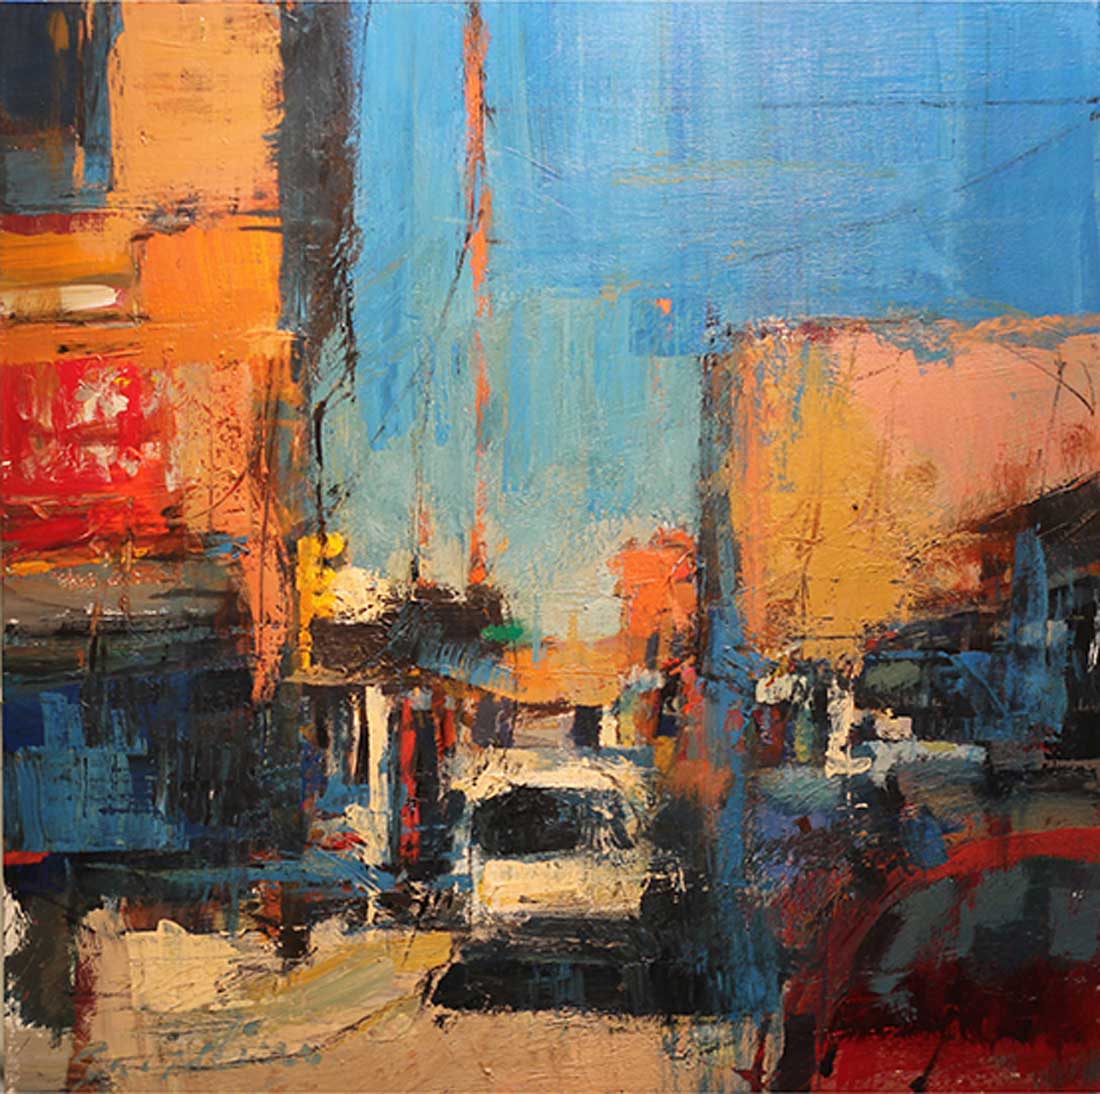 Fort Worth’s Tony Saladino abstracts one particular historic district in his painting “Fort Worth Stockyards Revisited II.”